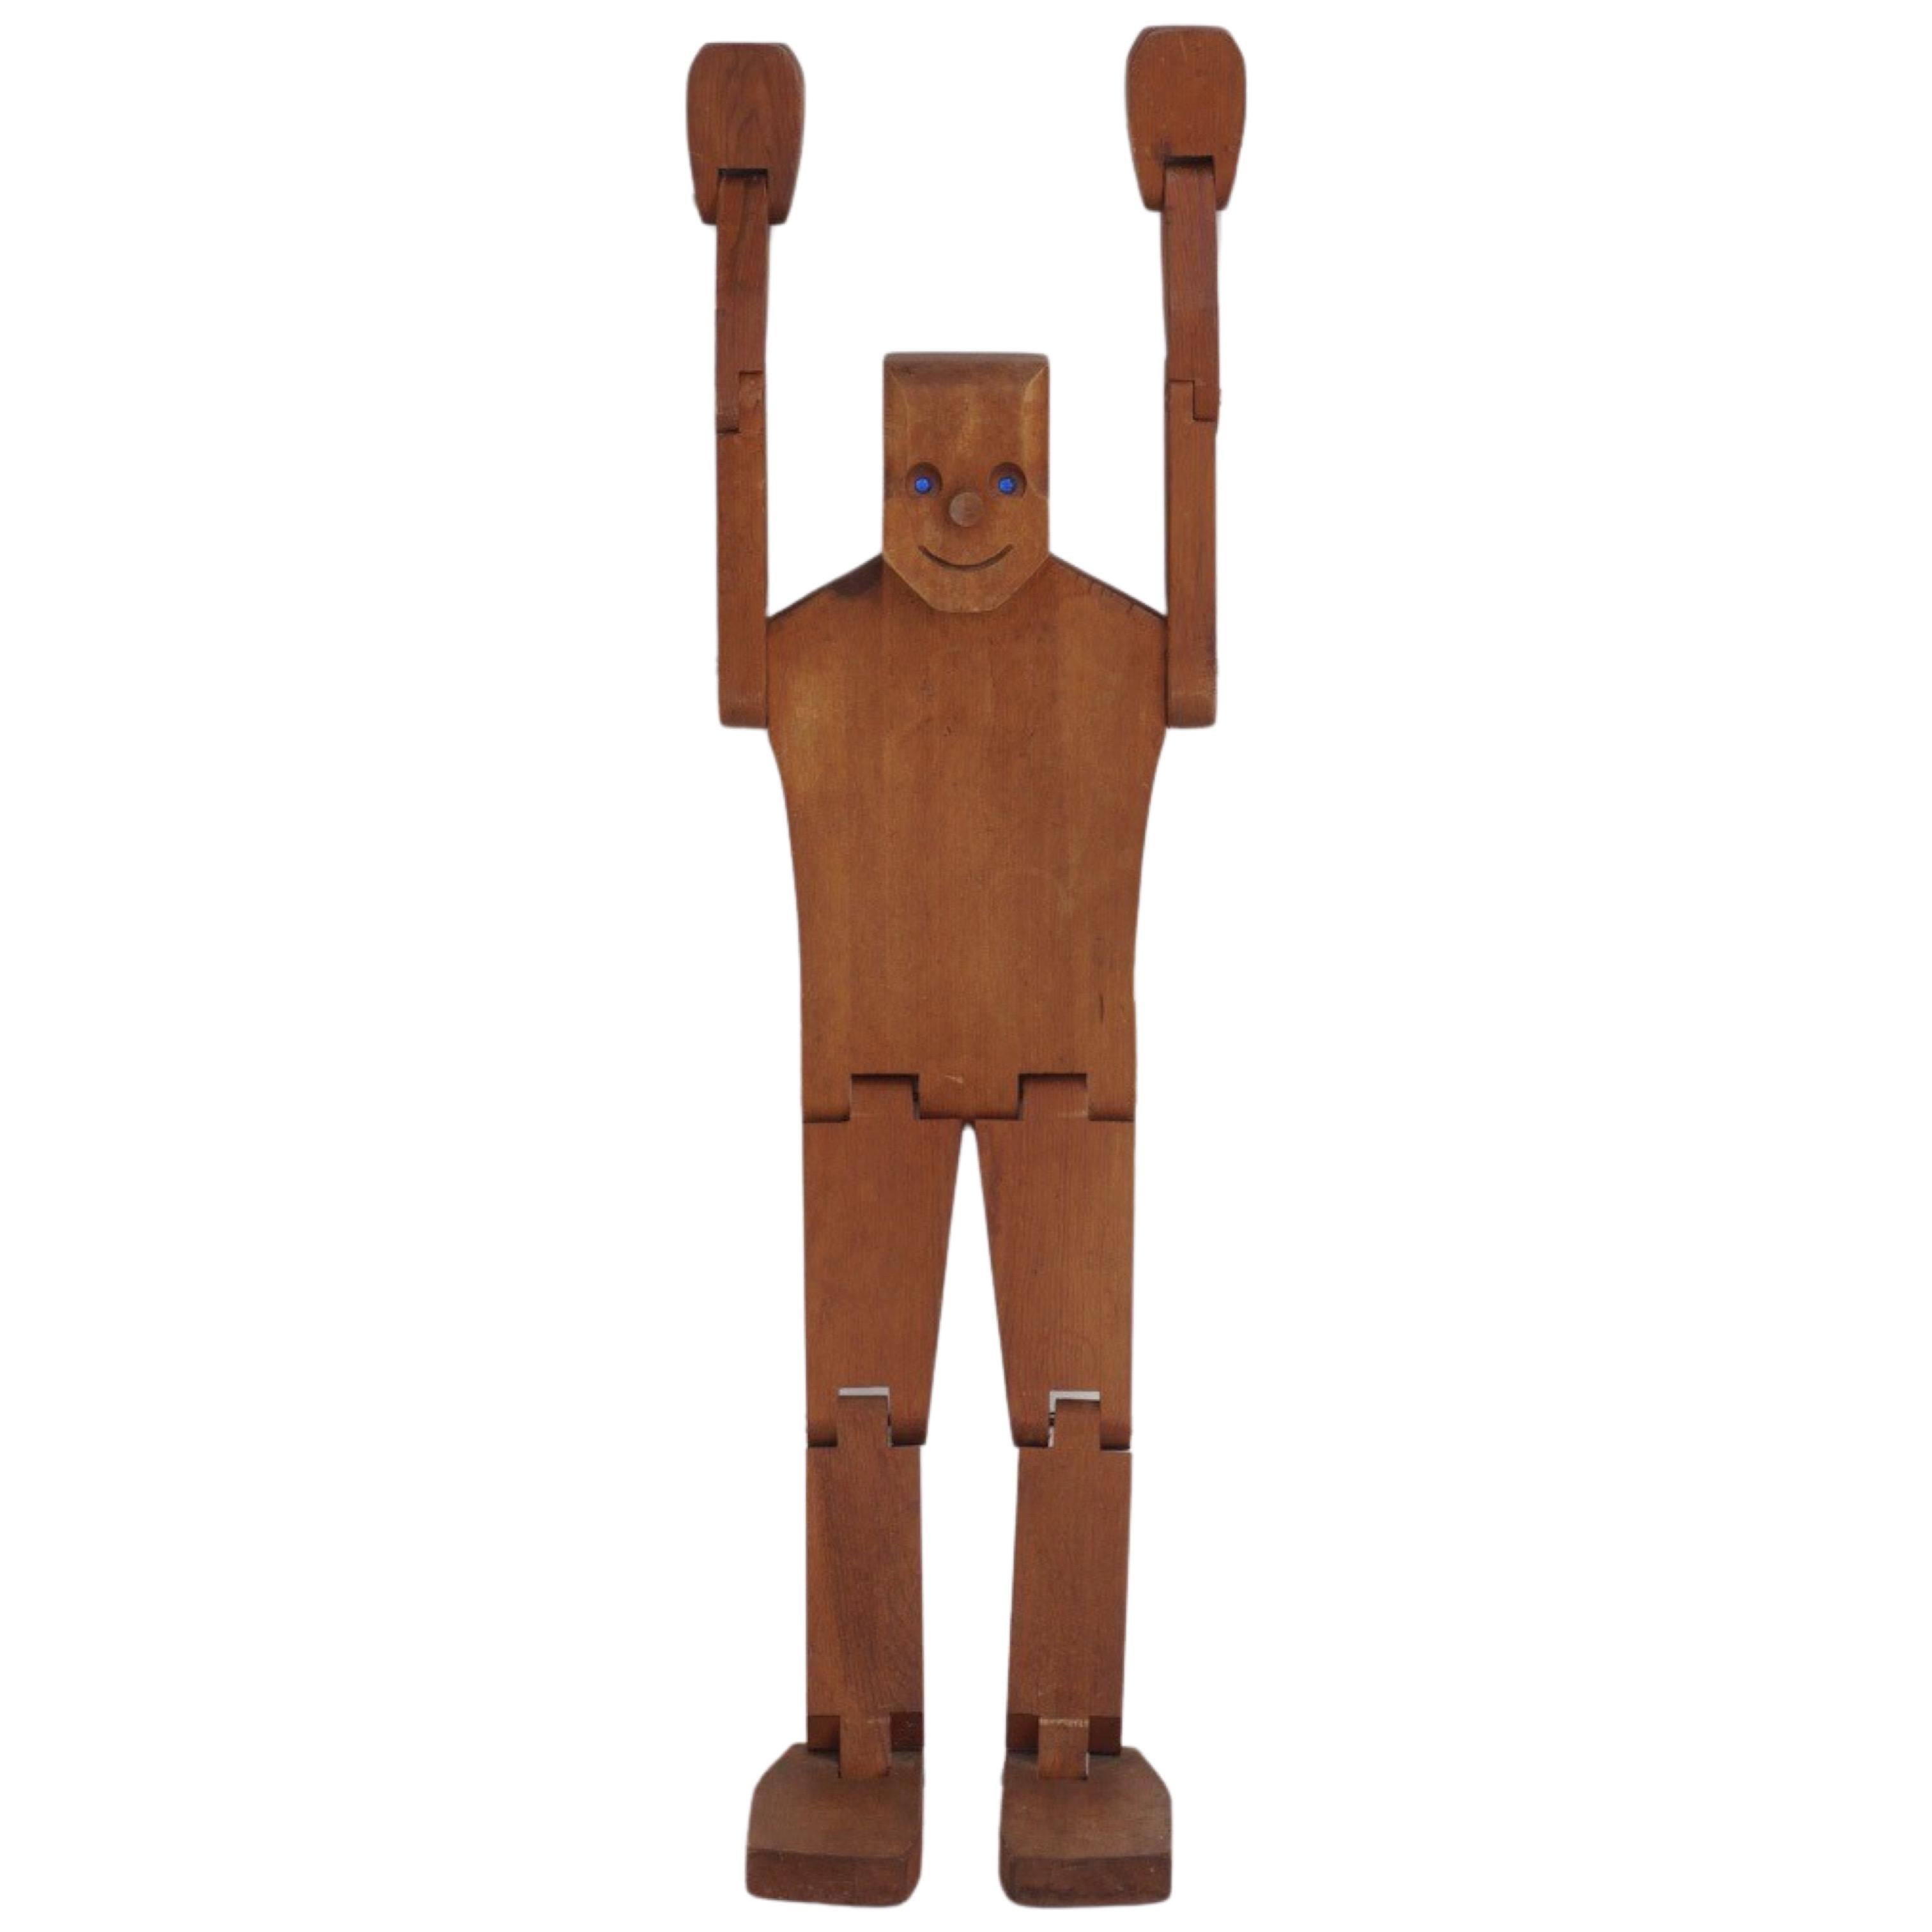 Metal Articulated Wood Figure by Don Ellefson, 1980s For Sale